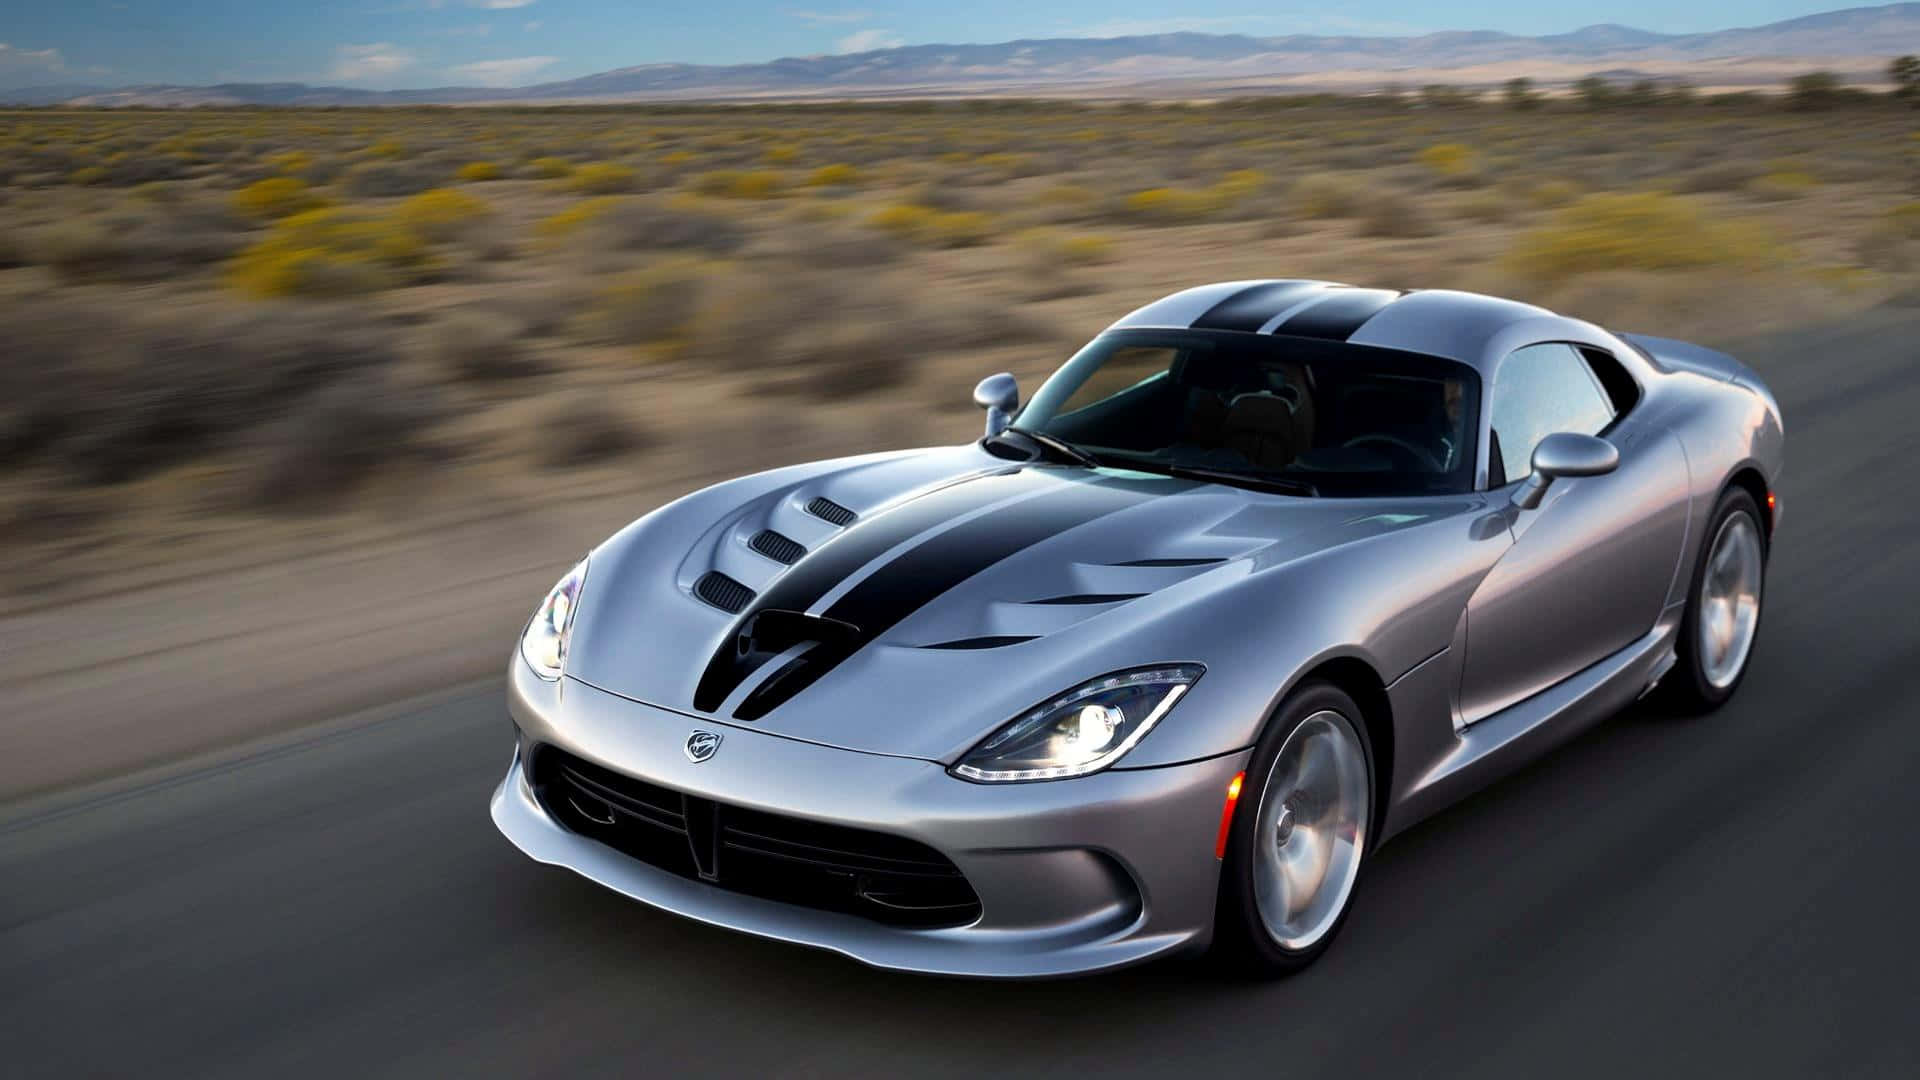 The Powerful and Intense Dodge Viper Thrilling on Roadway Wallpaper